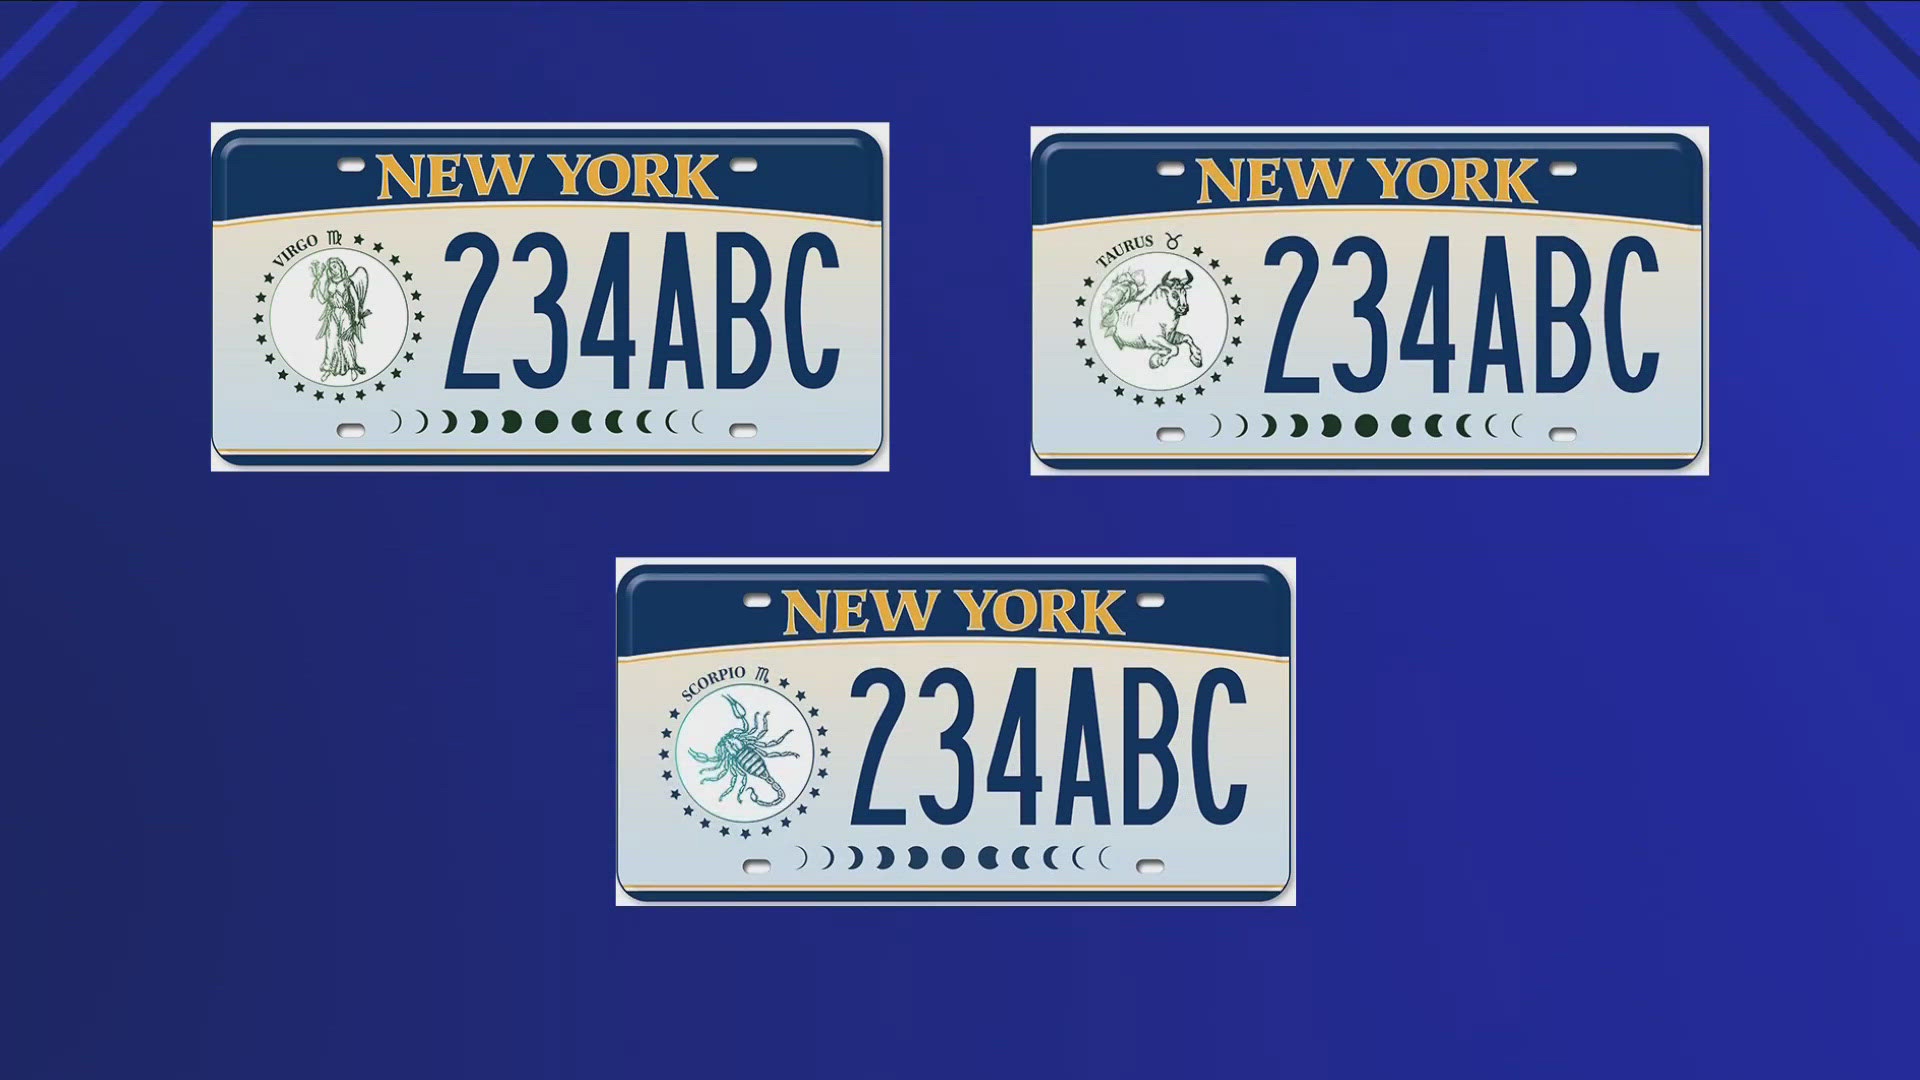 The images on each plate will be familiar to zodiac enthusiasts who wish to switch it up from the state's standard options.